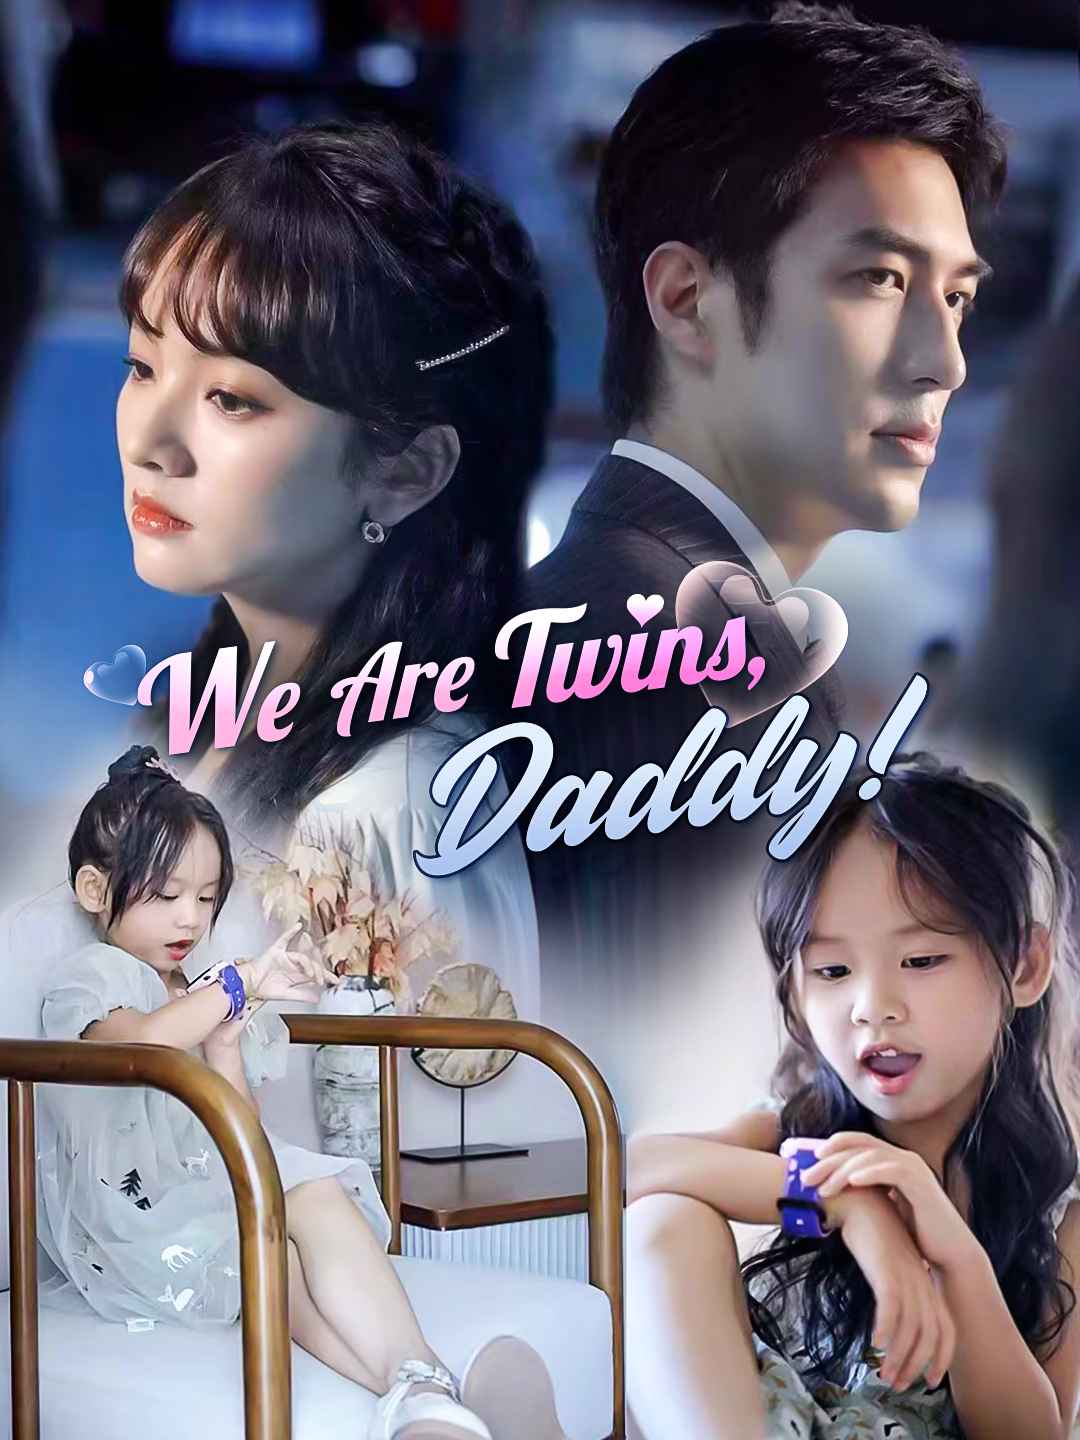 We Are Twins, Daddy!